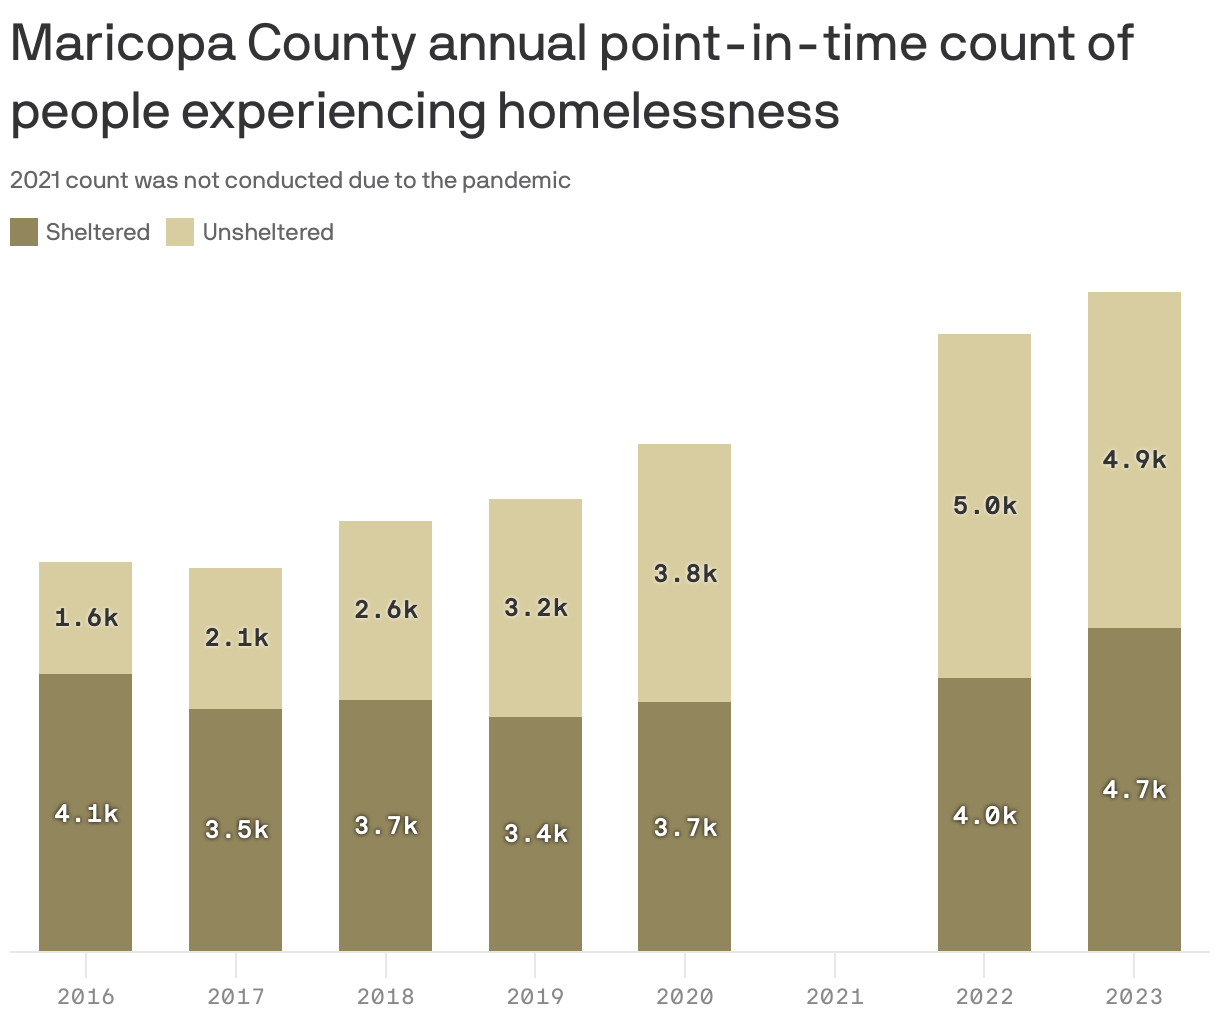 Maricopa County annual point-in-time count of people experiencing homelessness